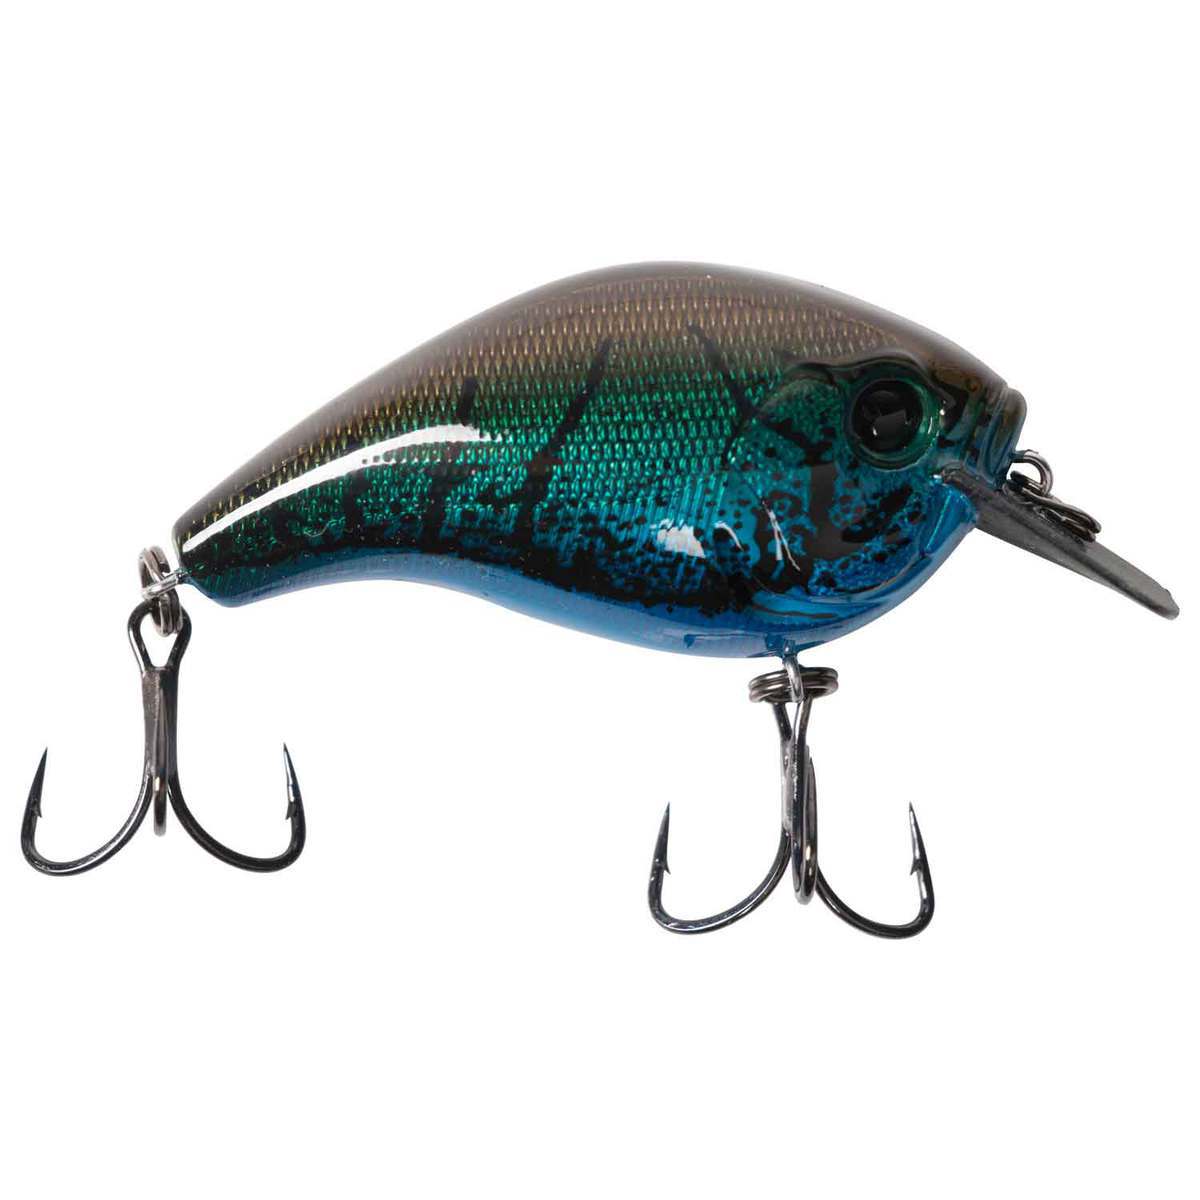 13 Fishing Scamp Square Bill Crankbait - Day Old Guac